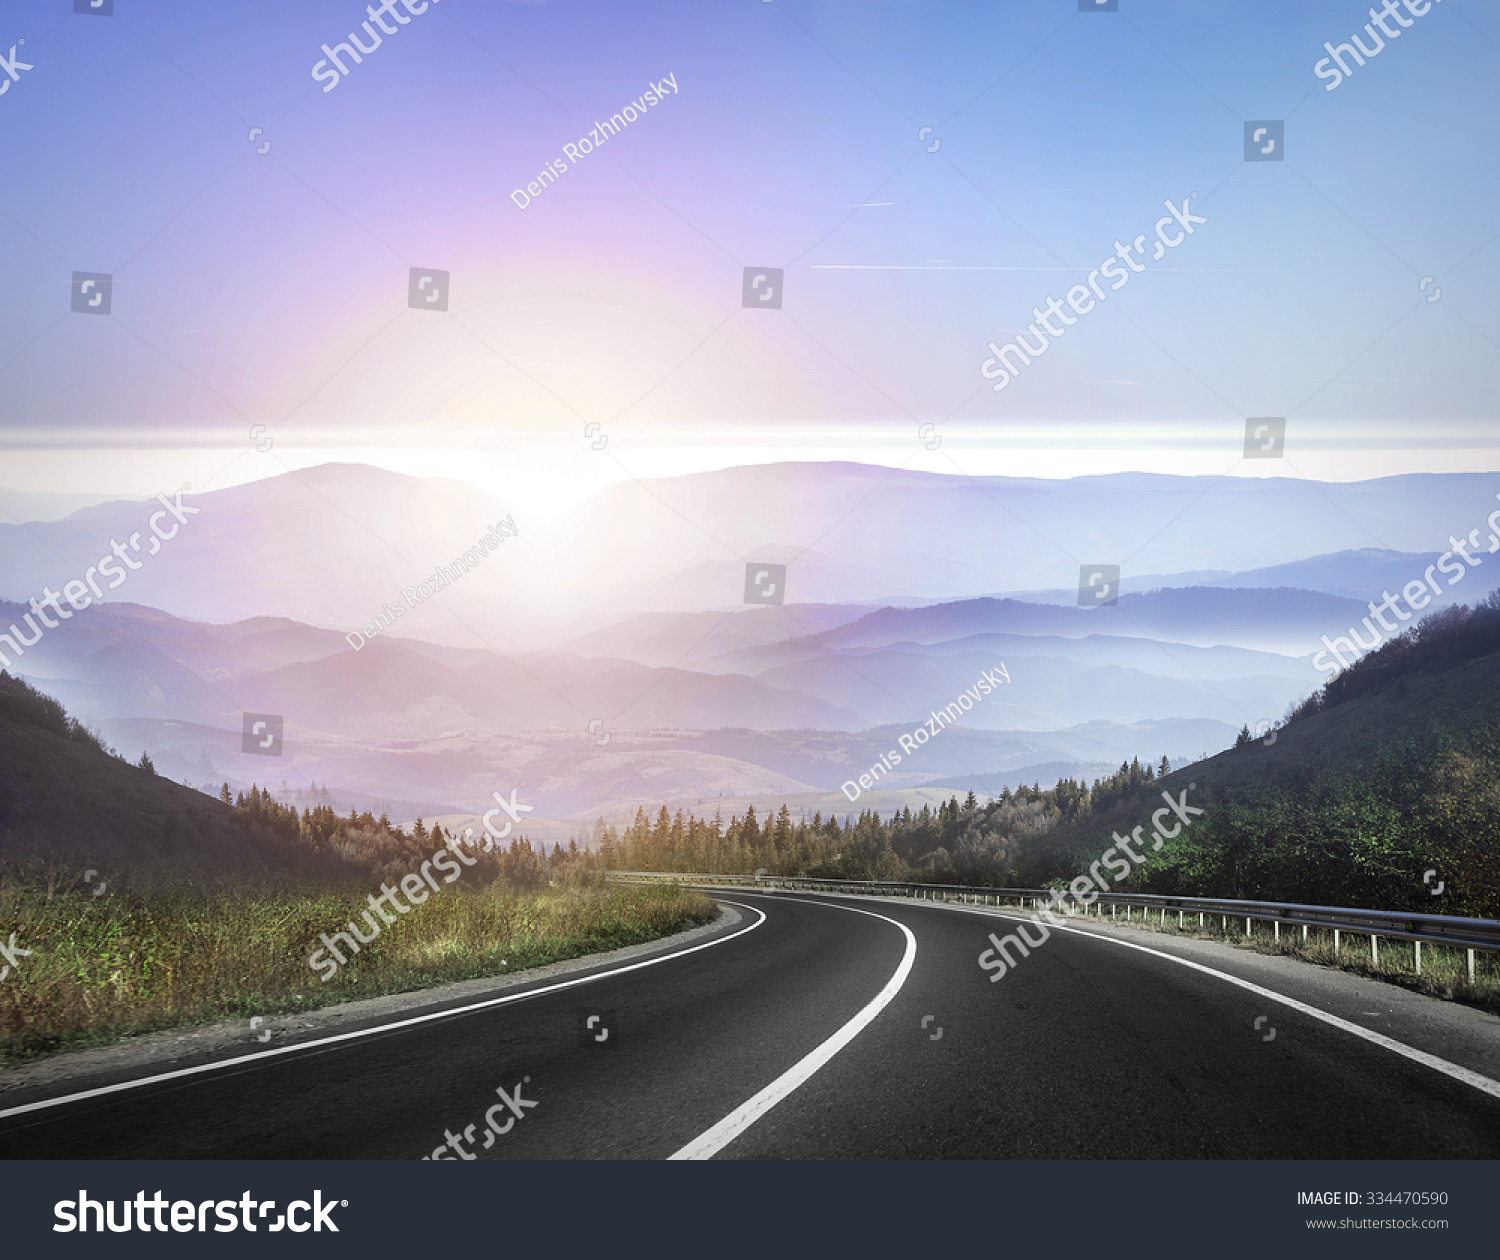 Highway road against mountains and a sky at the sunrise or sunset. #334470590